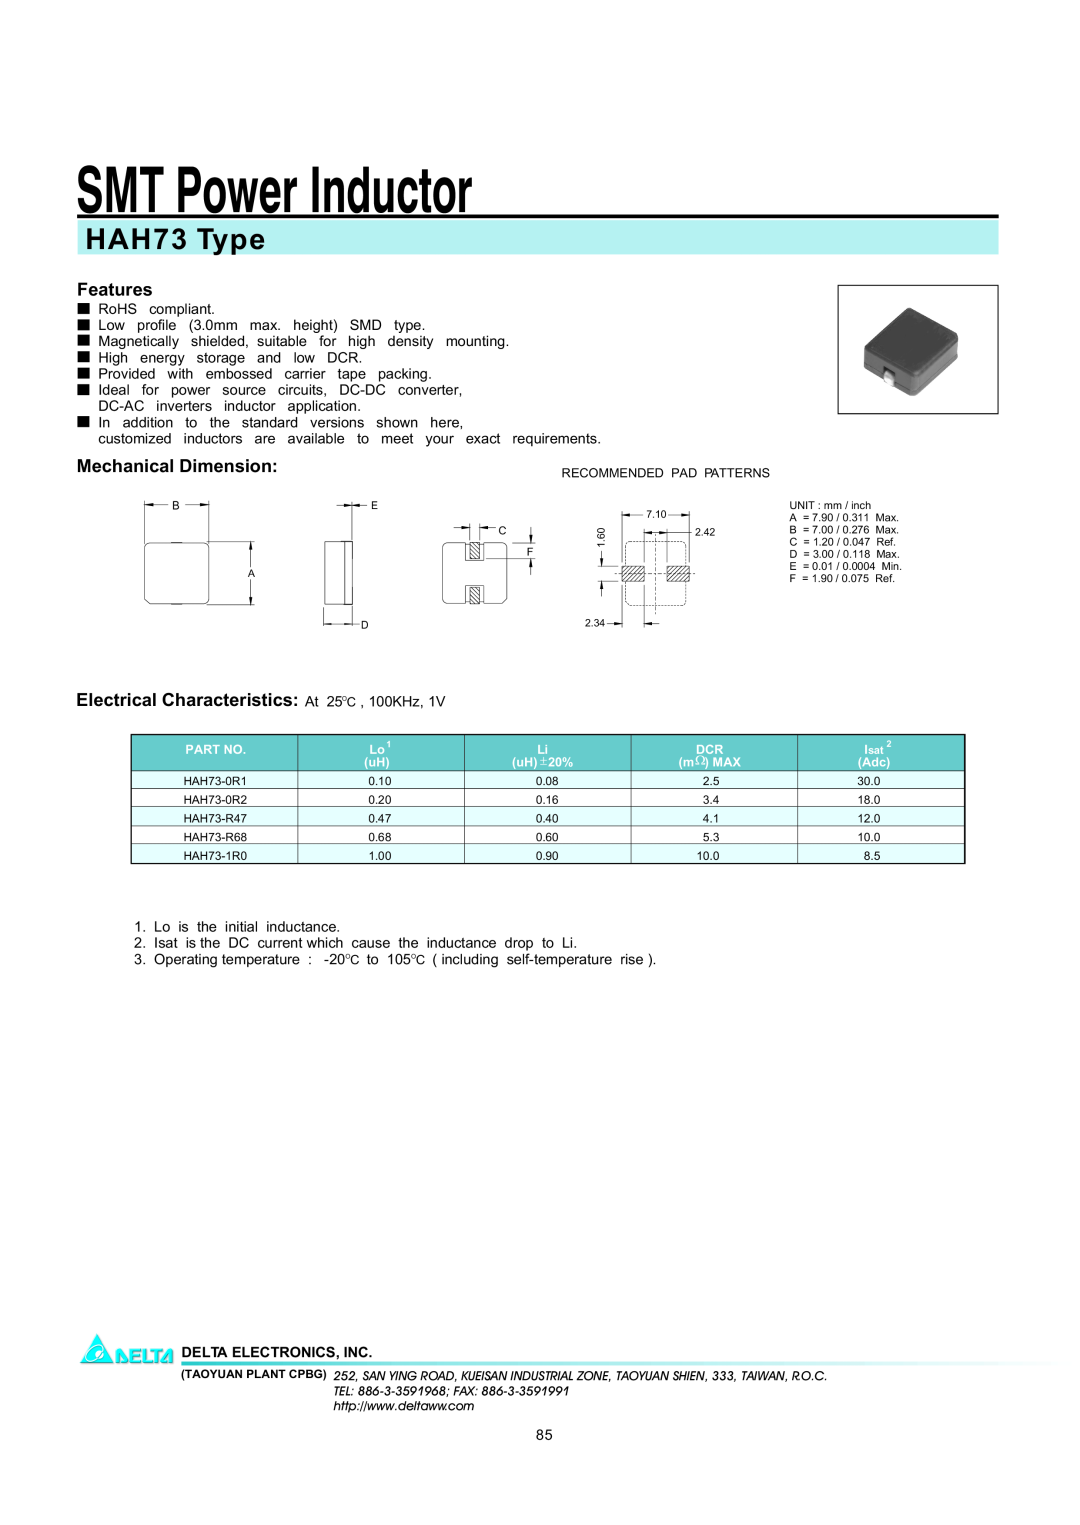 Delta Electronics manual SMT Power Inductor, HAH73 Type, Features, Mechanical Dimension, Delta Electronics, Inc 